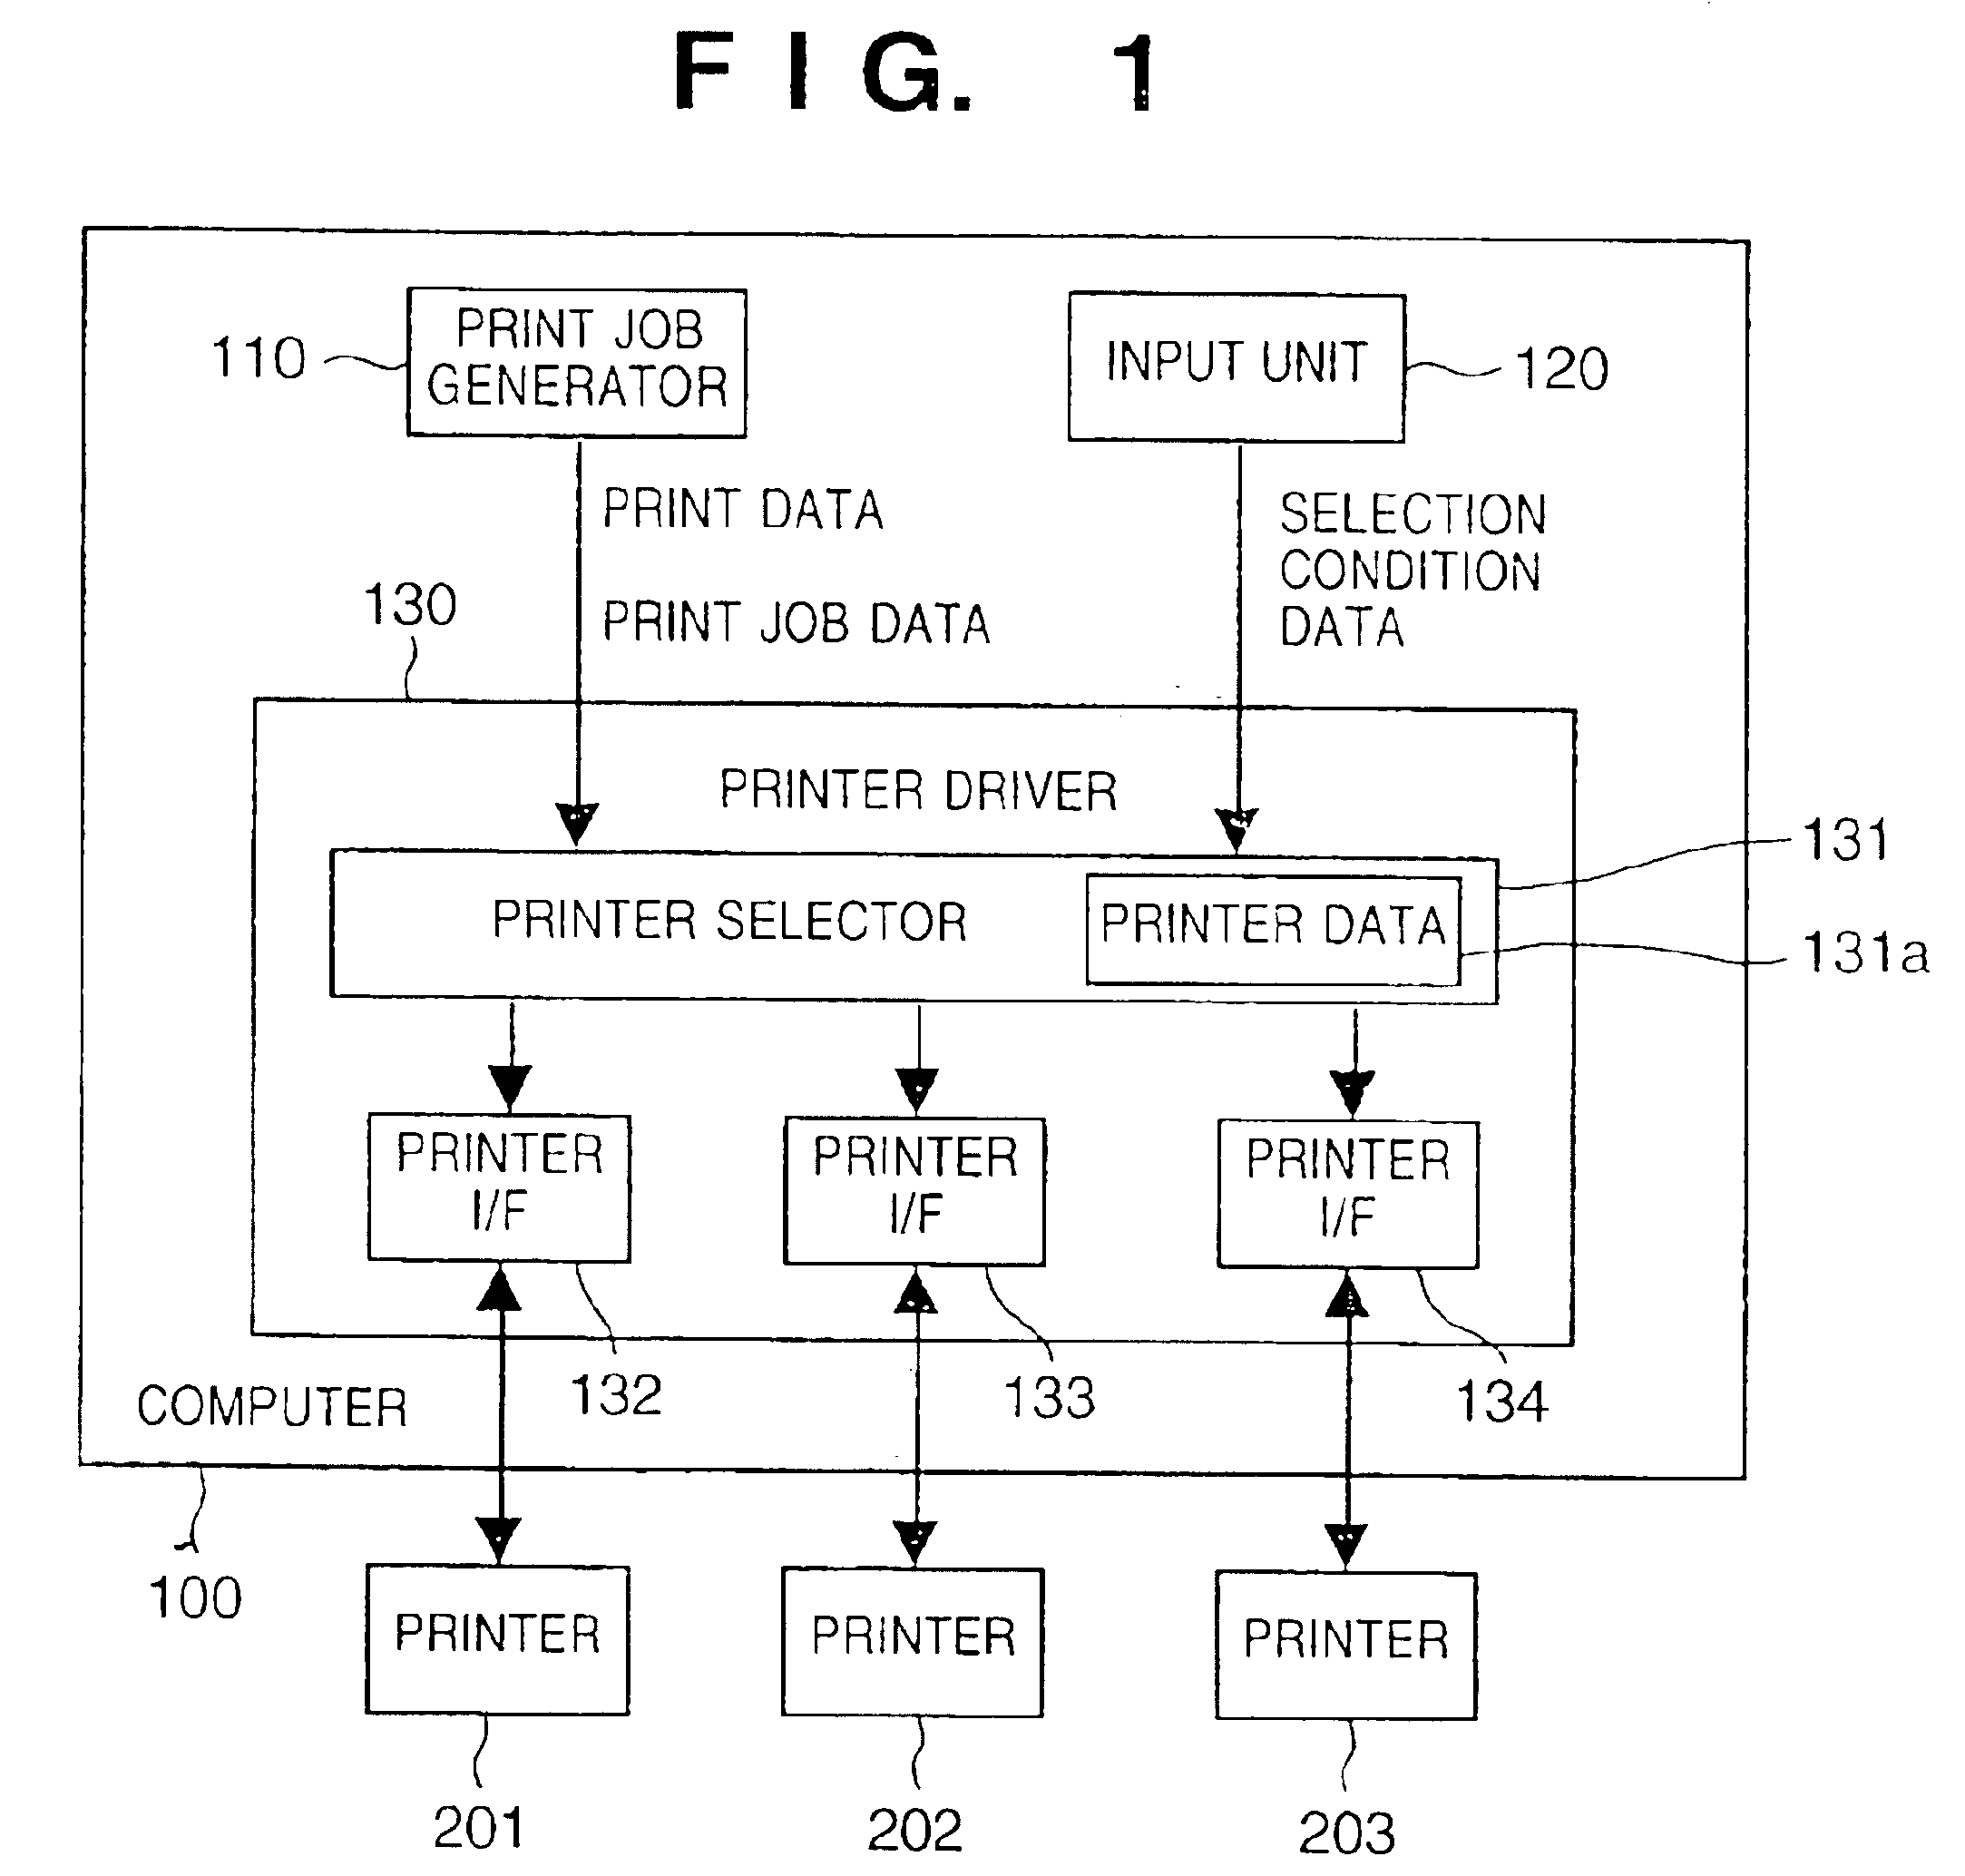 Designating an image processing apparatus based on limited selection conditions